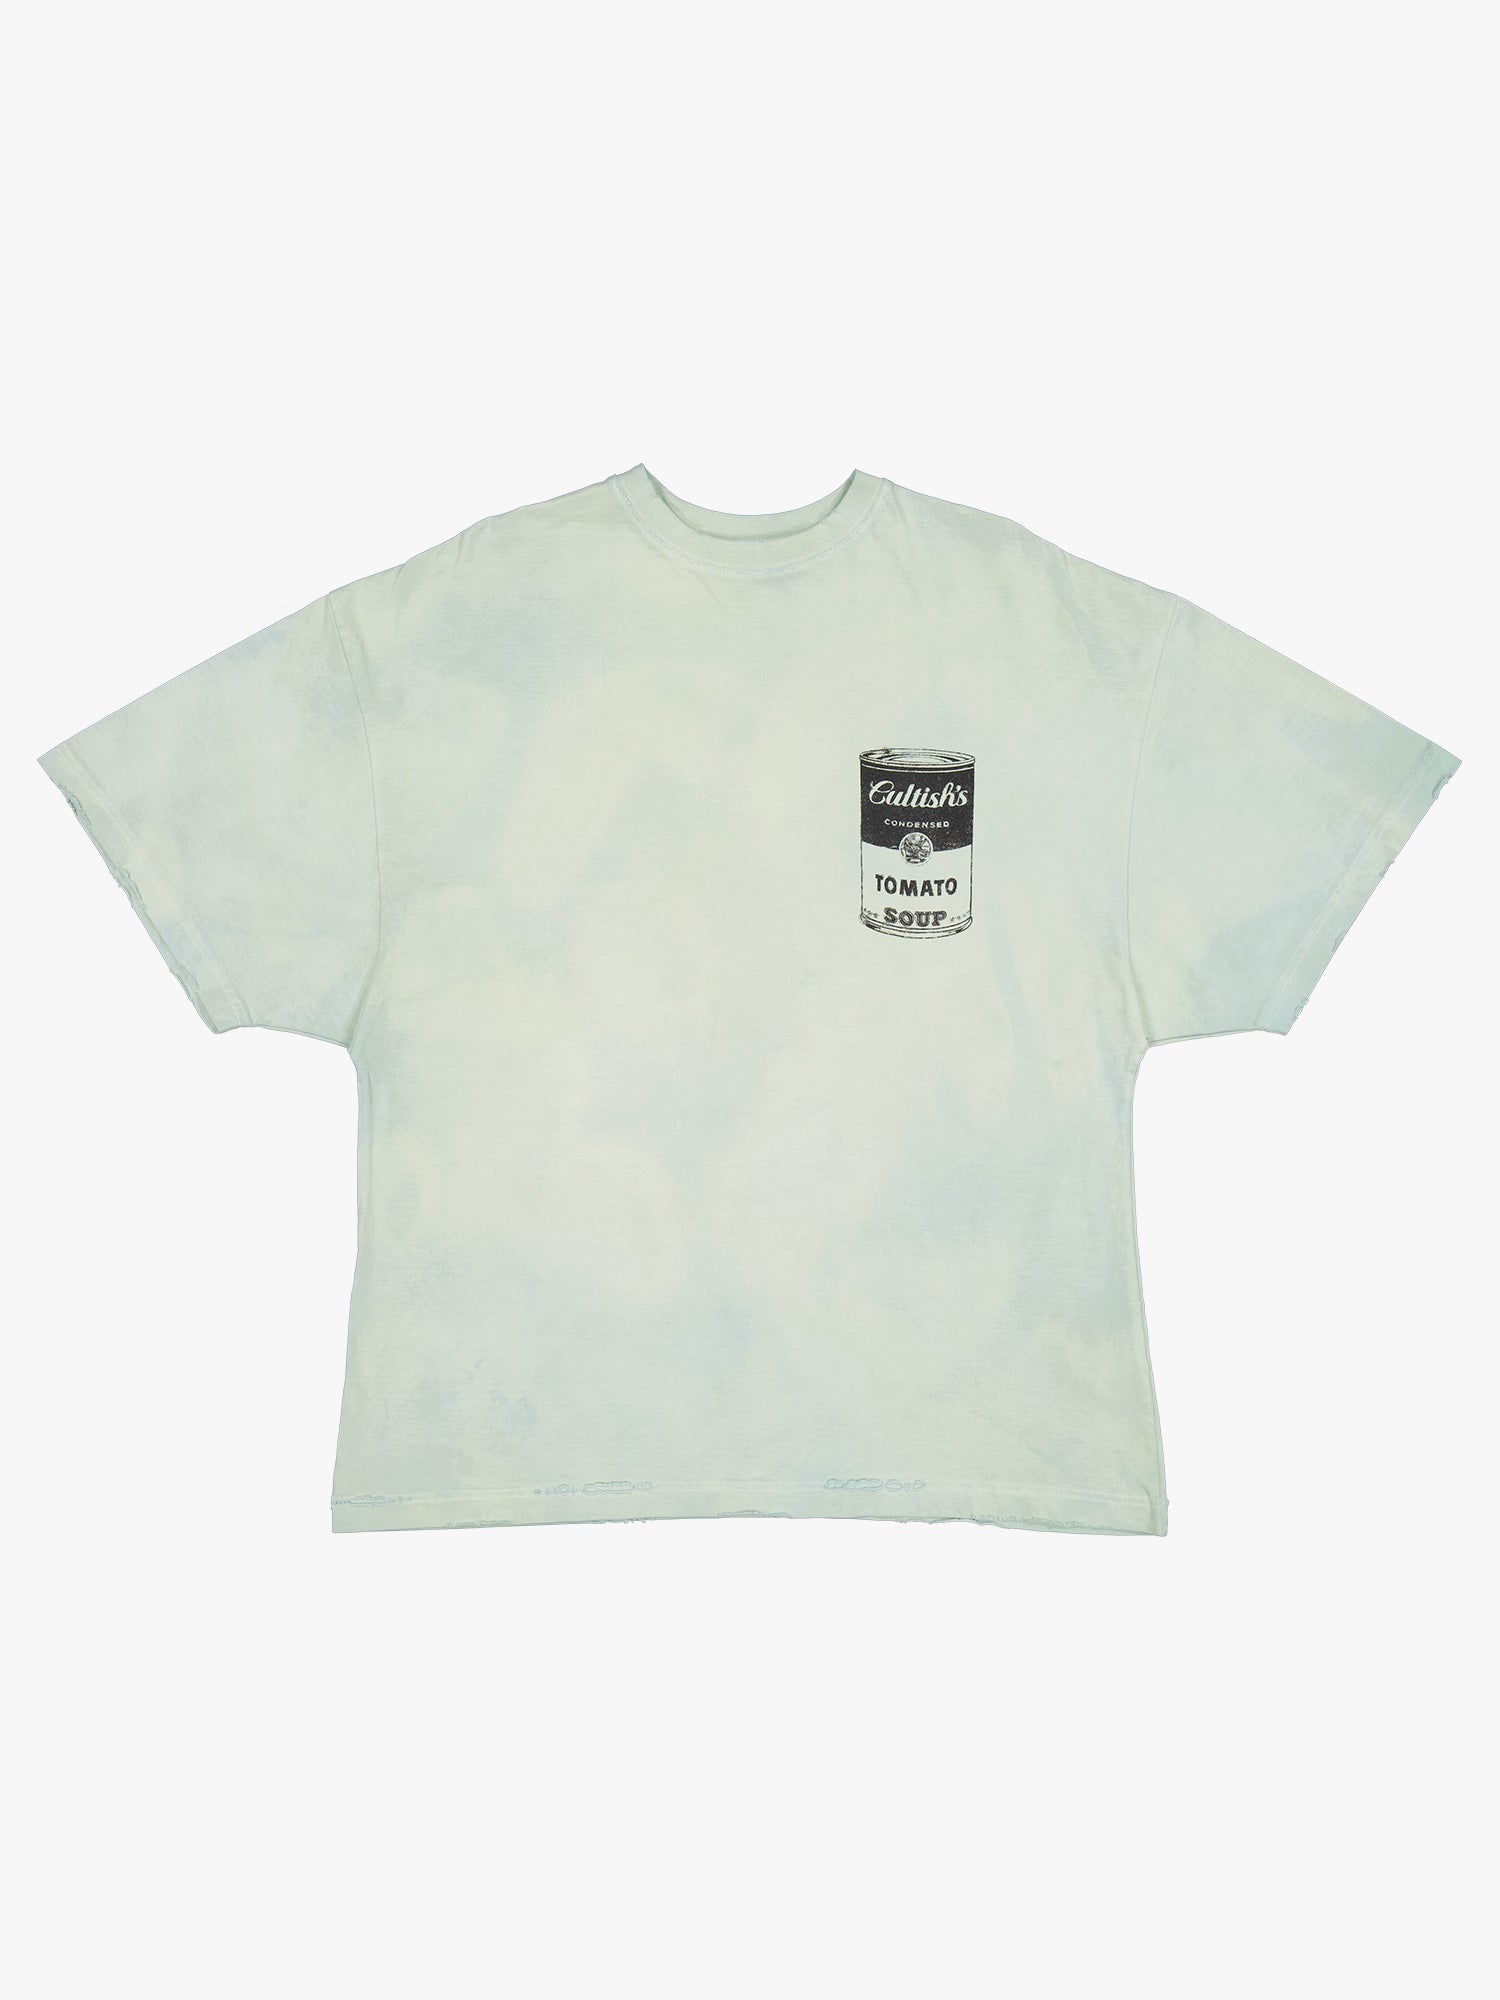 ⓔ Cans Oversized T-Shirt